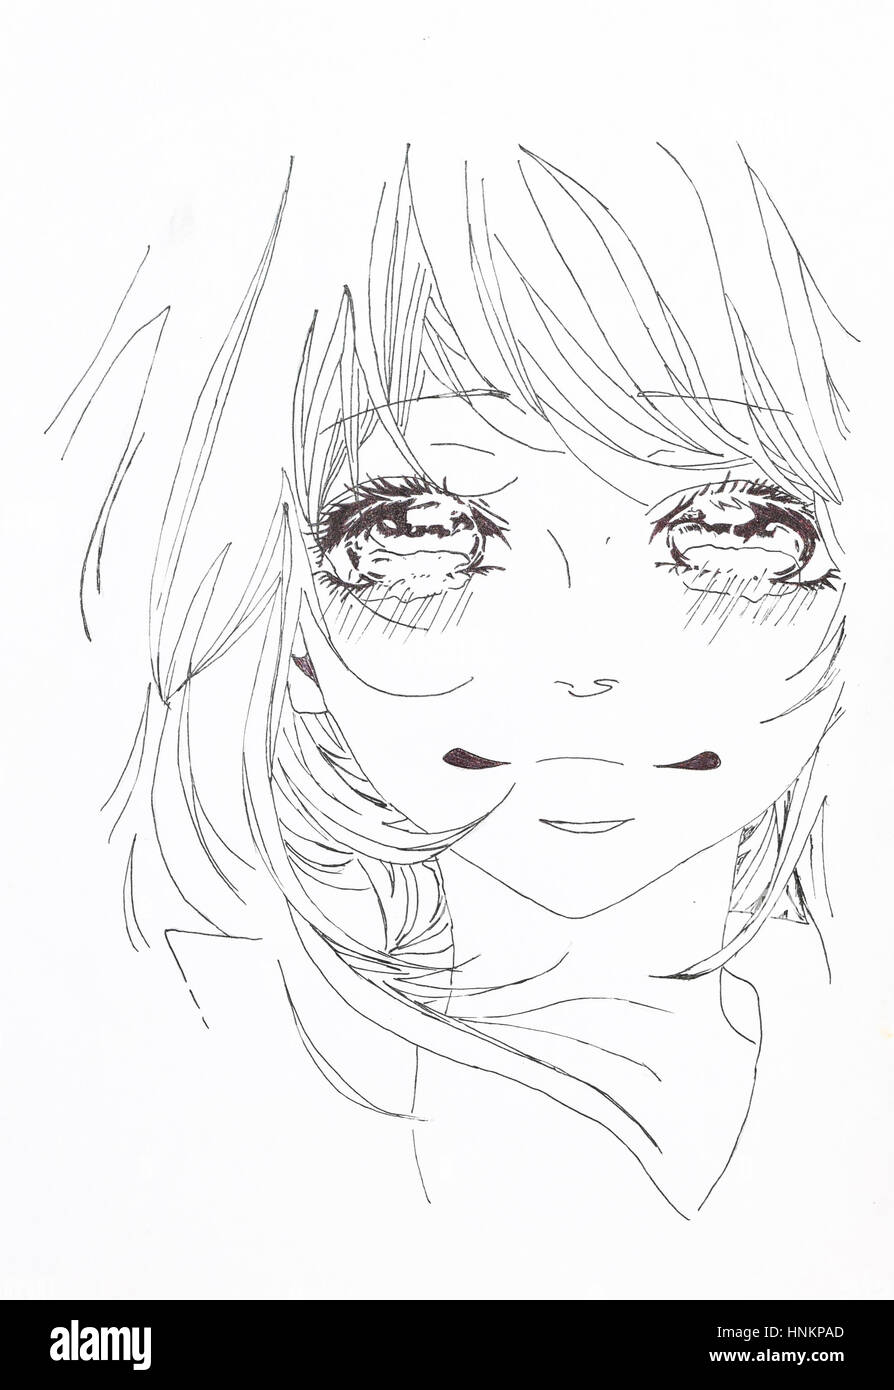 How To Draw an Anime Portrait  So that anyone can do it  Omnart   Skillshare